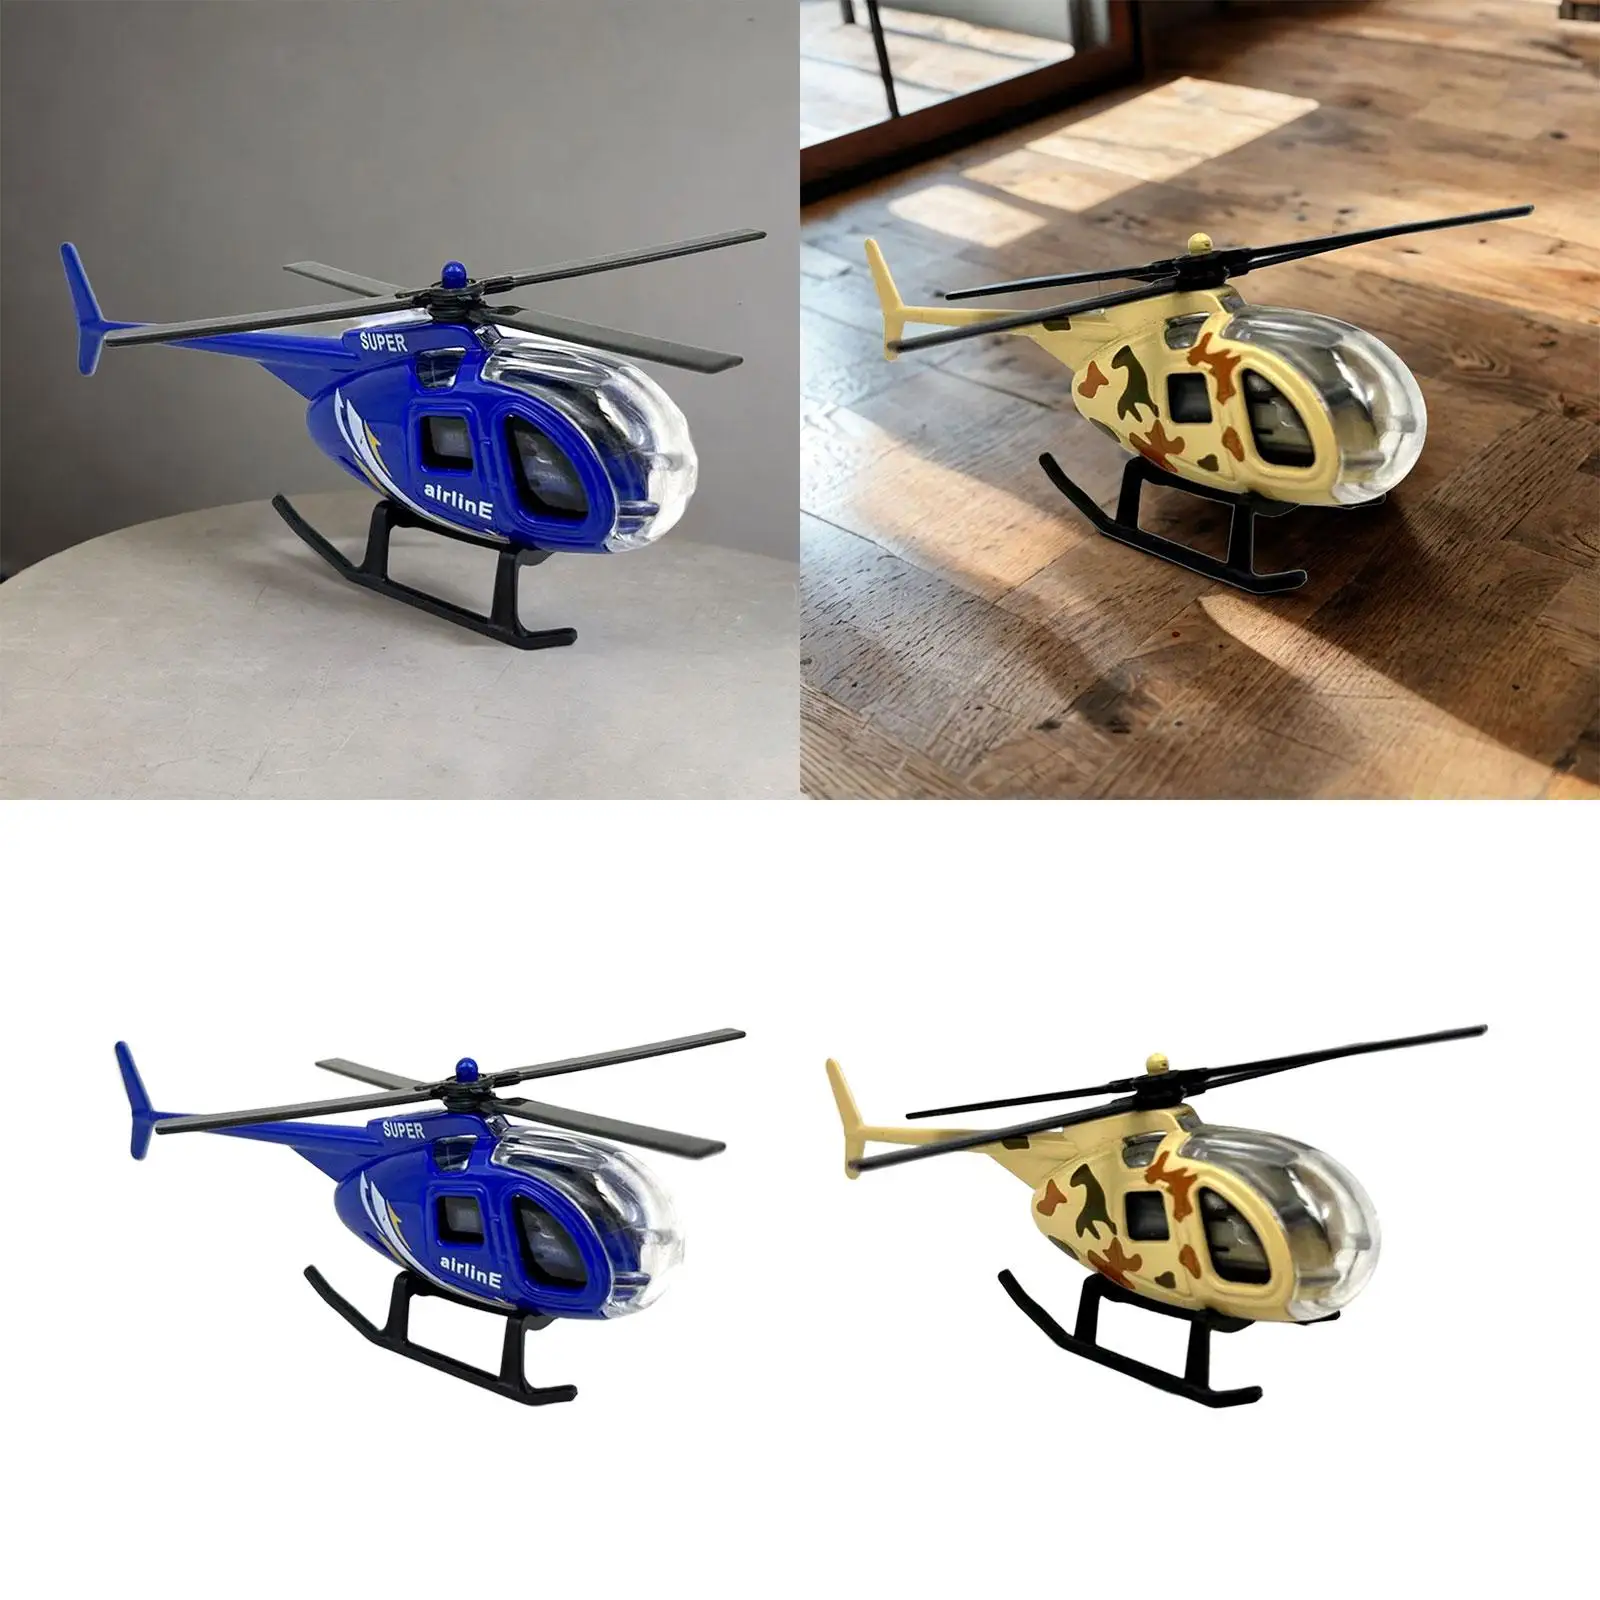 1/64 Scale Diecast Alloy Helicopter Ornament for Boys and Girls Cake Decoration Party Favor Desktop Display Airplane Toy